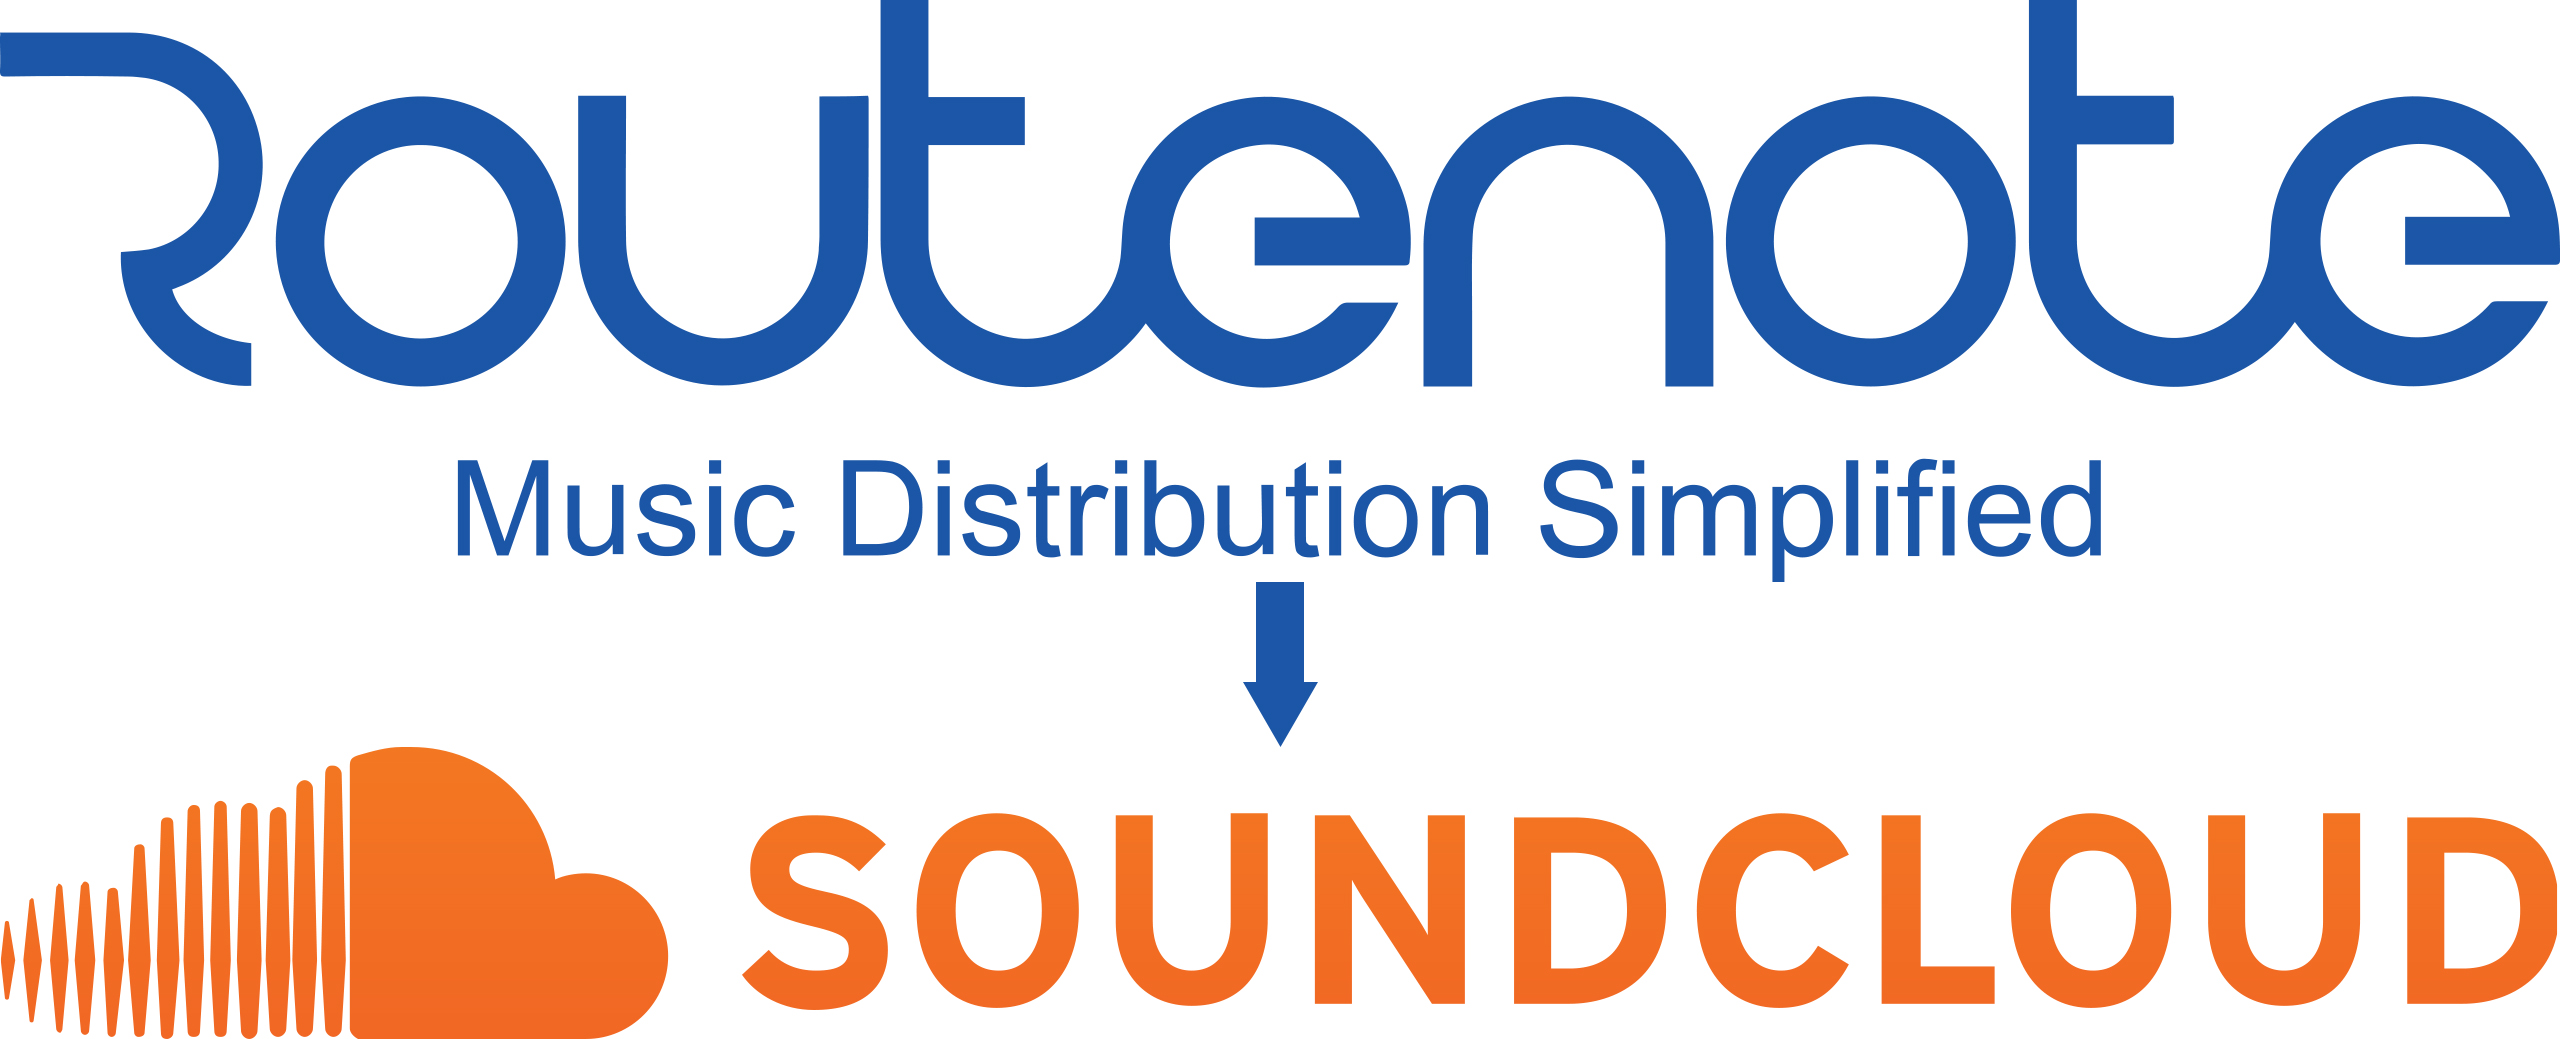 Why does CD Baby not distribute to SoundCloud?